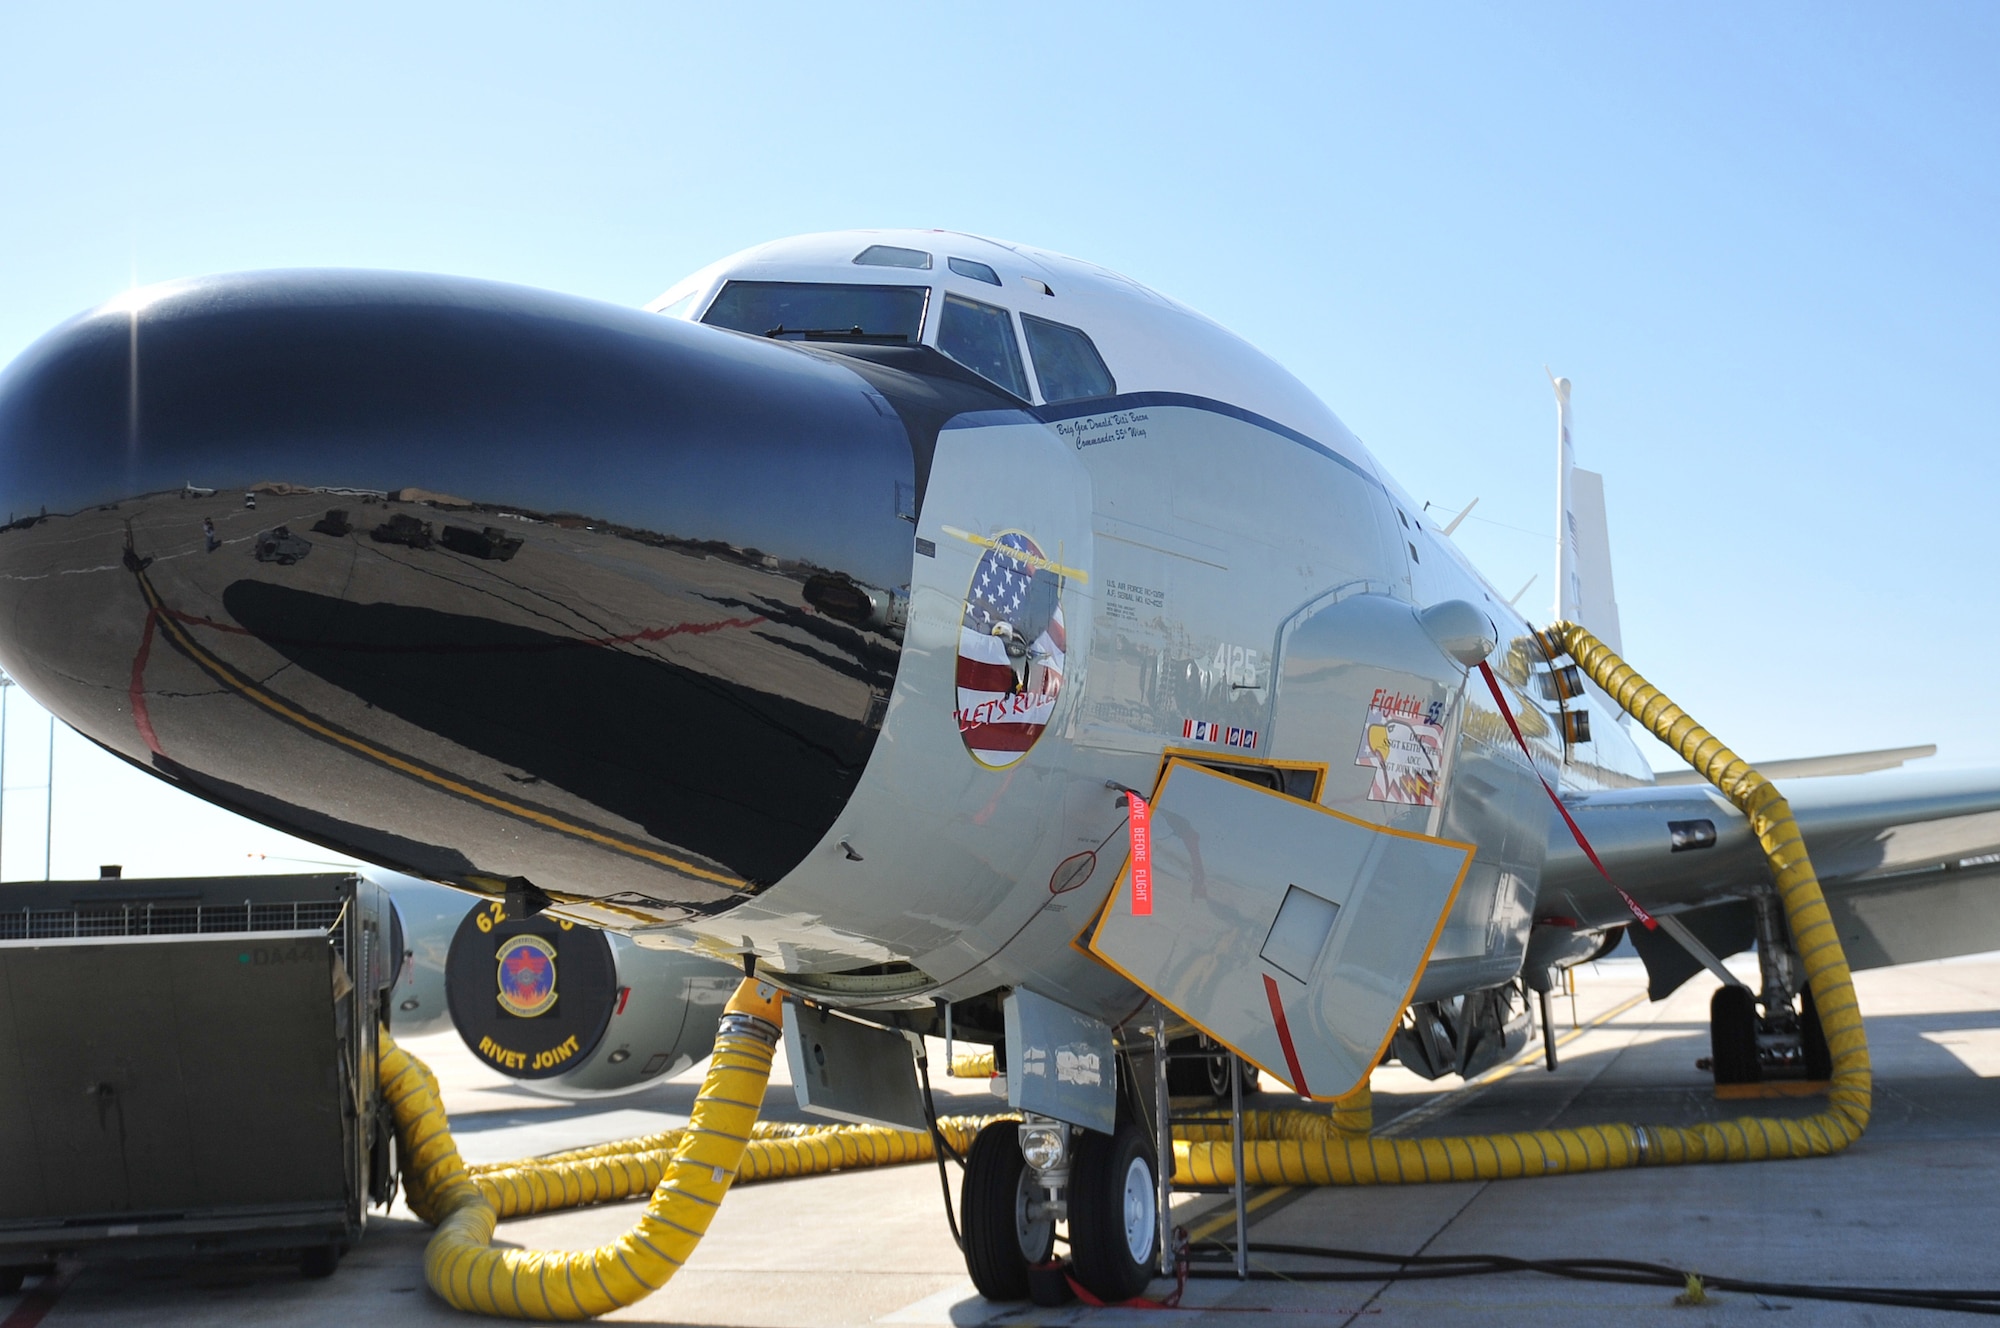 An RC-135V/W Rivet Joint sits on display outside the Bennie Davis Maintenance Facility as the new flagship aircraft of the 55th Wing at Offutt Air Force Base, Neb., March 16. The jet recently returned from being upgraded and was freshly painted with the new wing designator. The flagship aircraft stands as a symbol for every member of the 55th WG. (Photo by Jeff Gates/Released)
